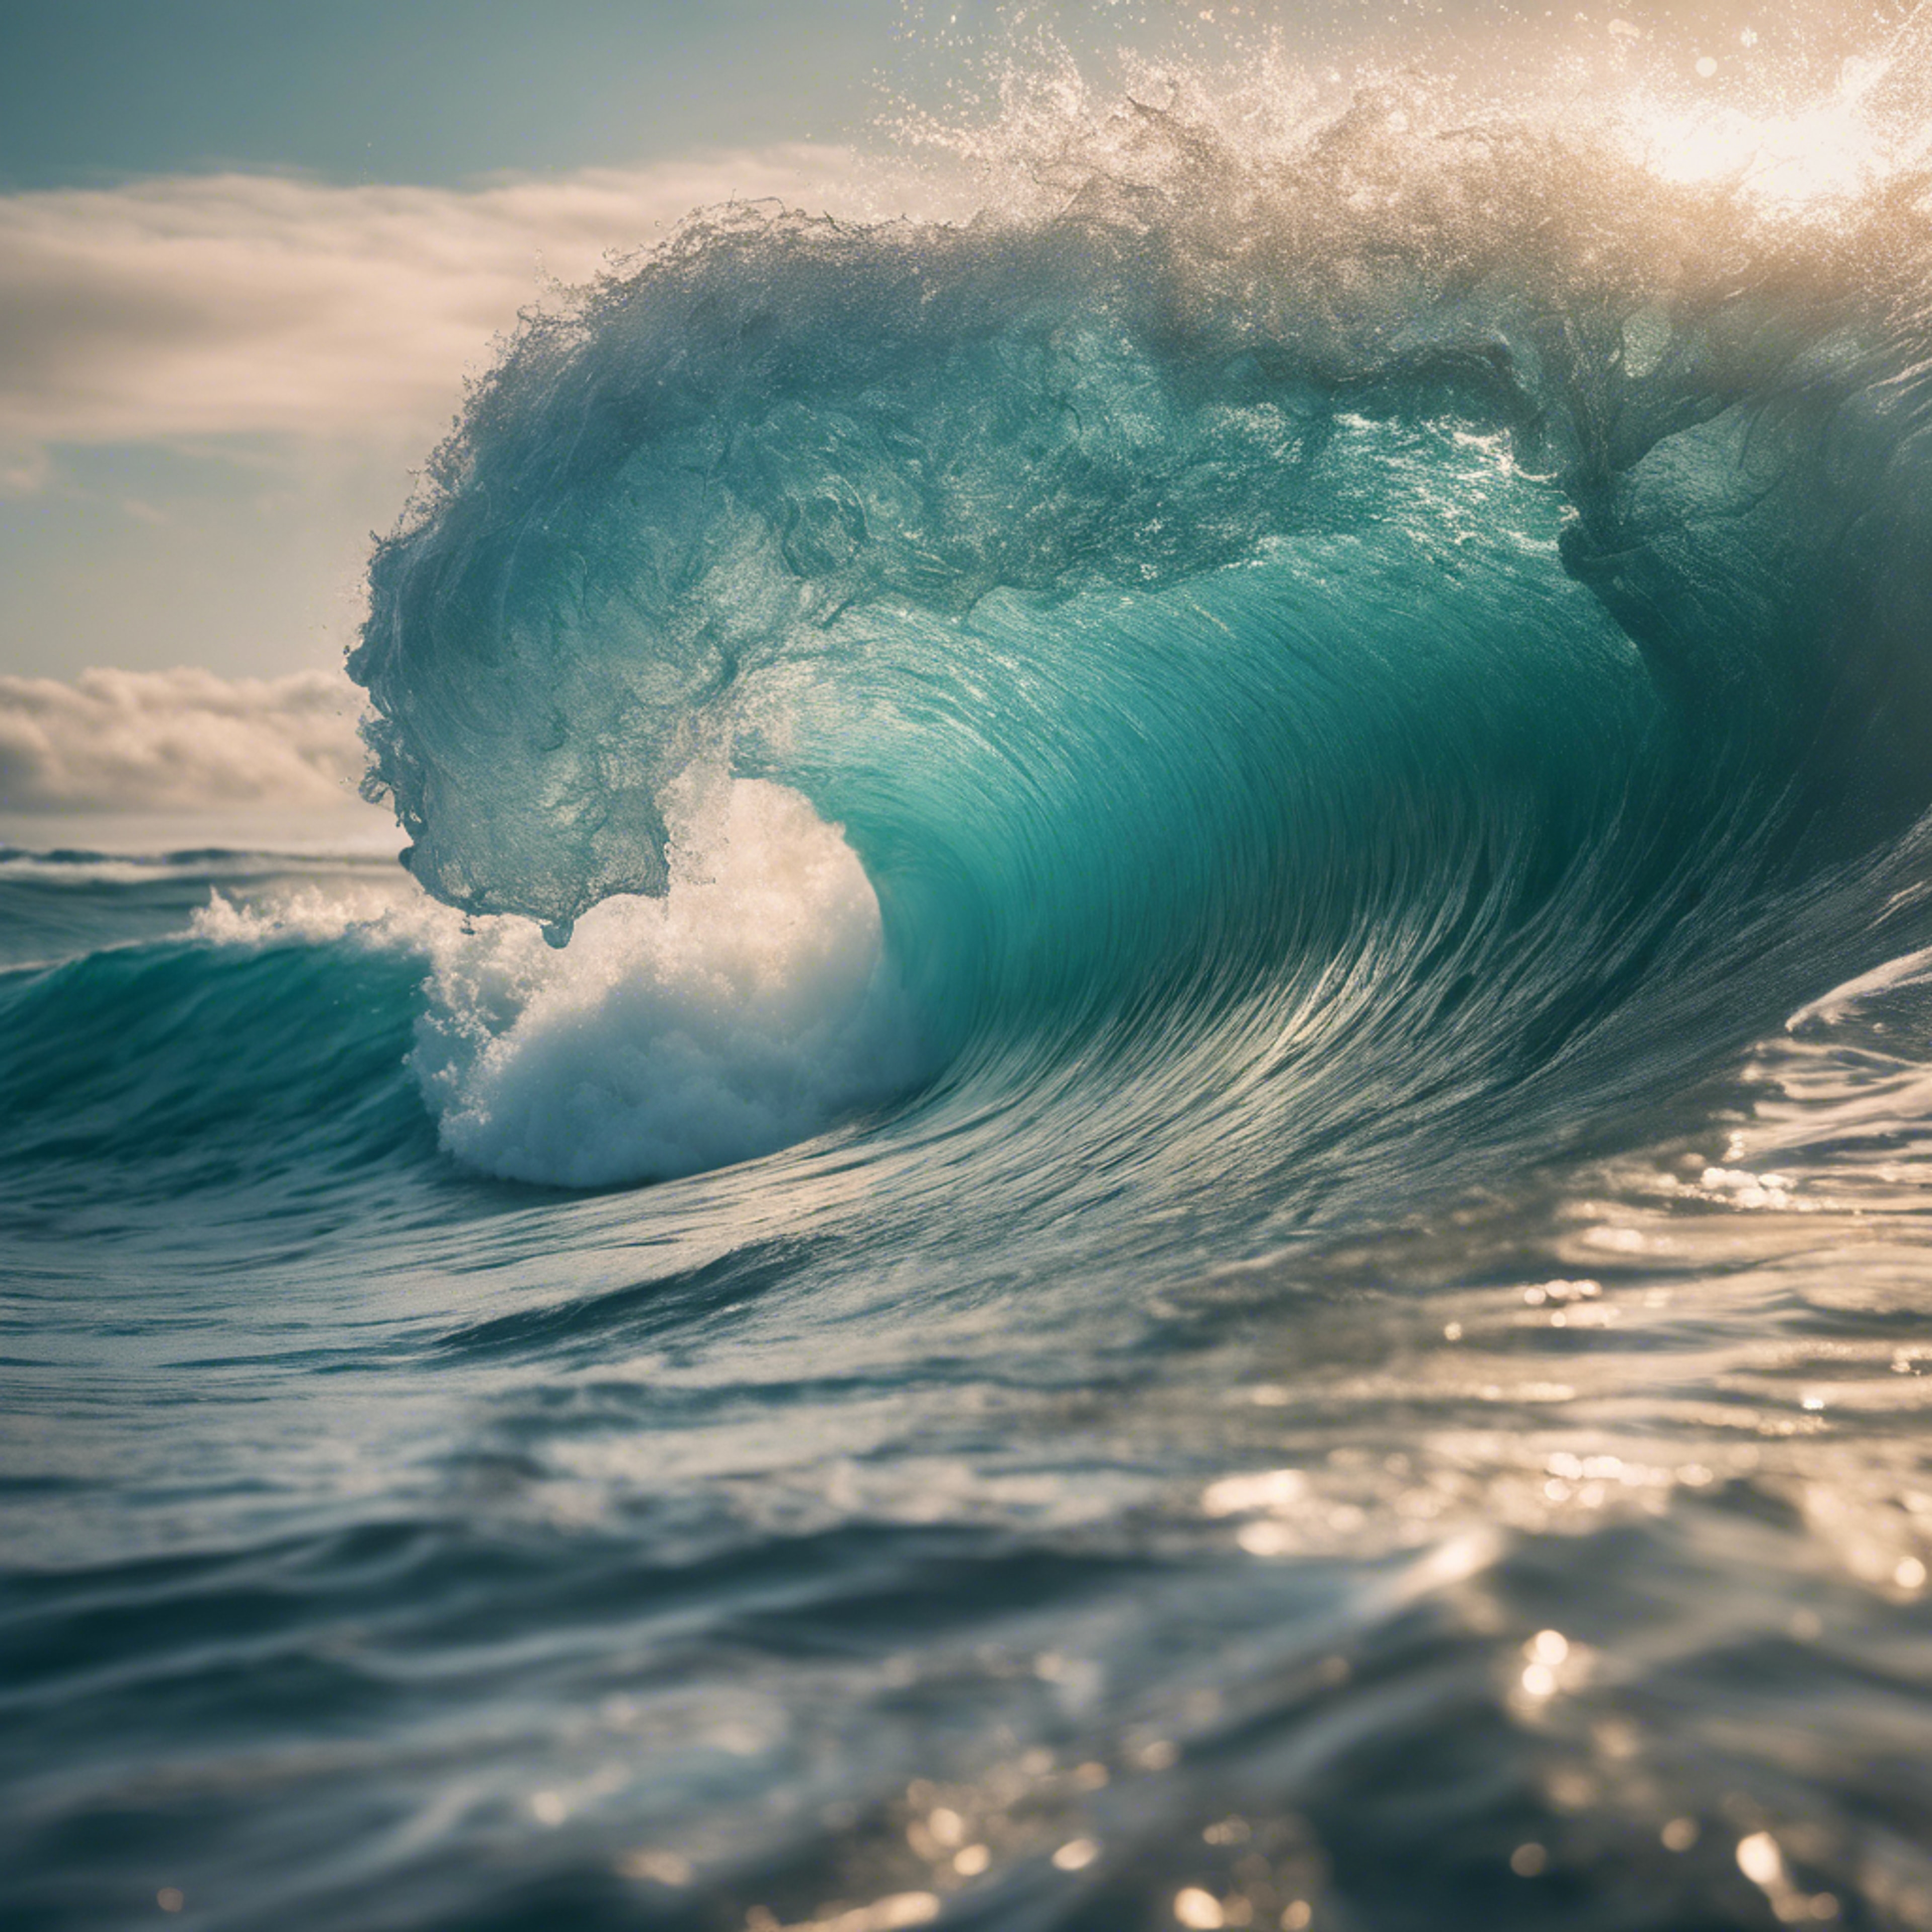 A powerful ocean wave about to crash, casting a cool teal hue. Papel de parede[600fa377246440af9acb]